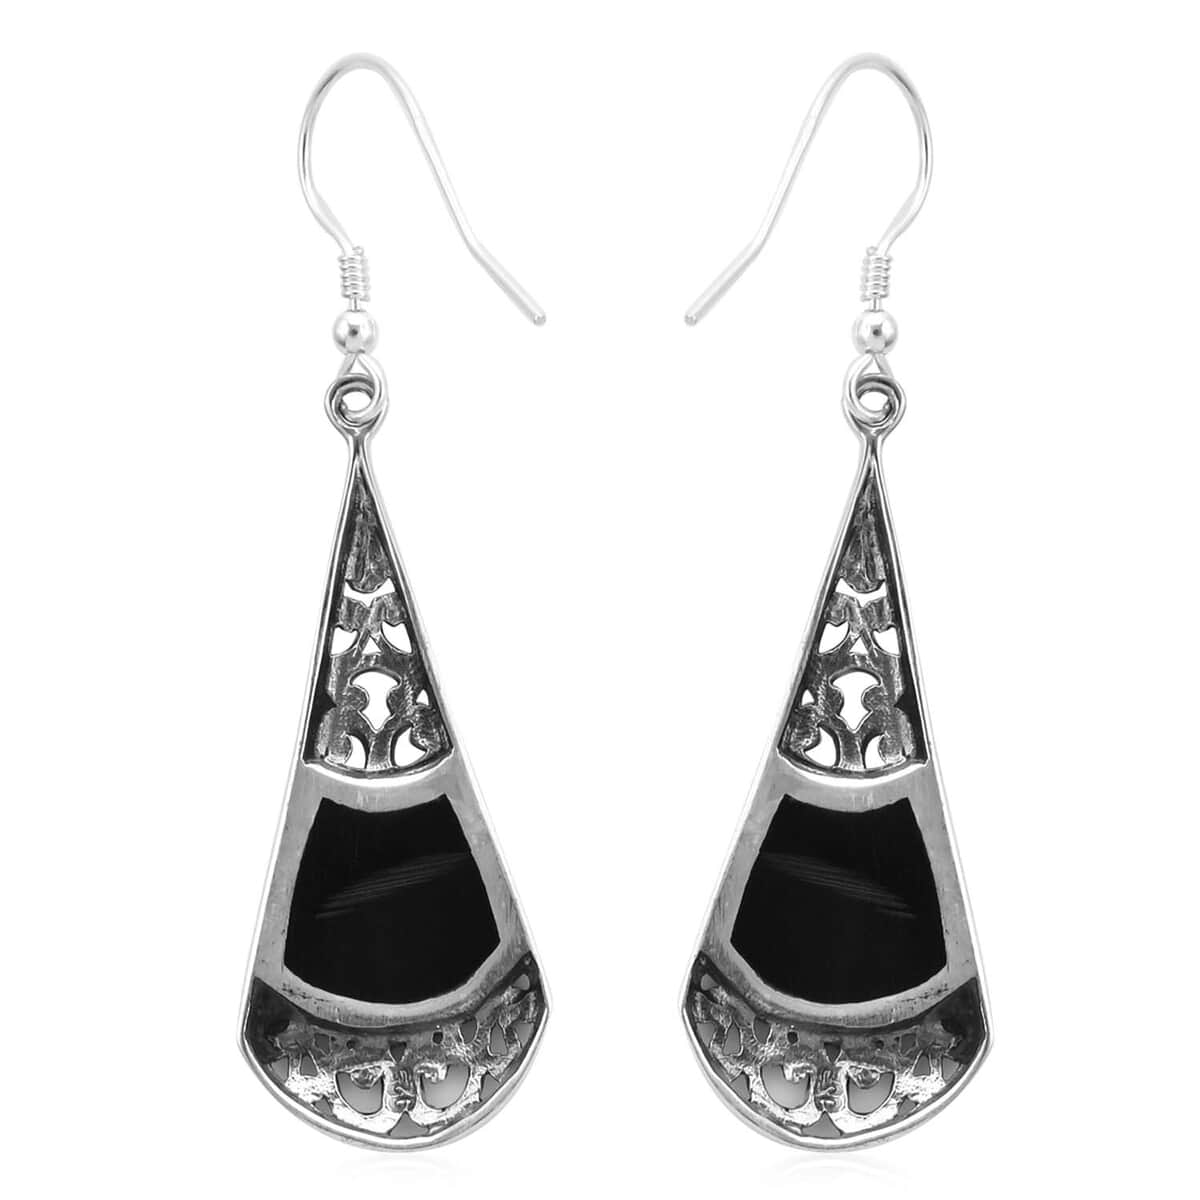 Abalone Shell Drop Earrings For Women in Sterling Silver, Beach Fashion Jewelry image number 6